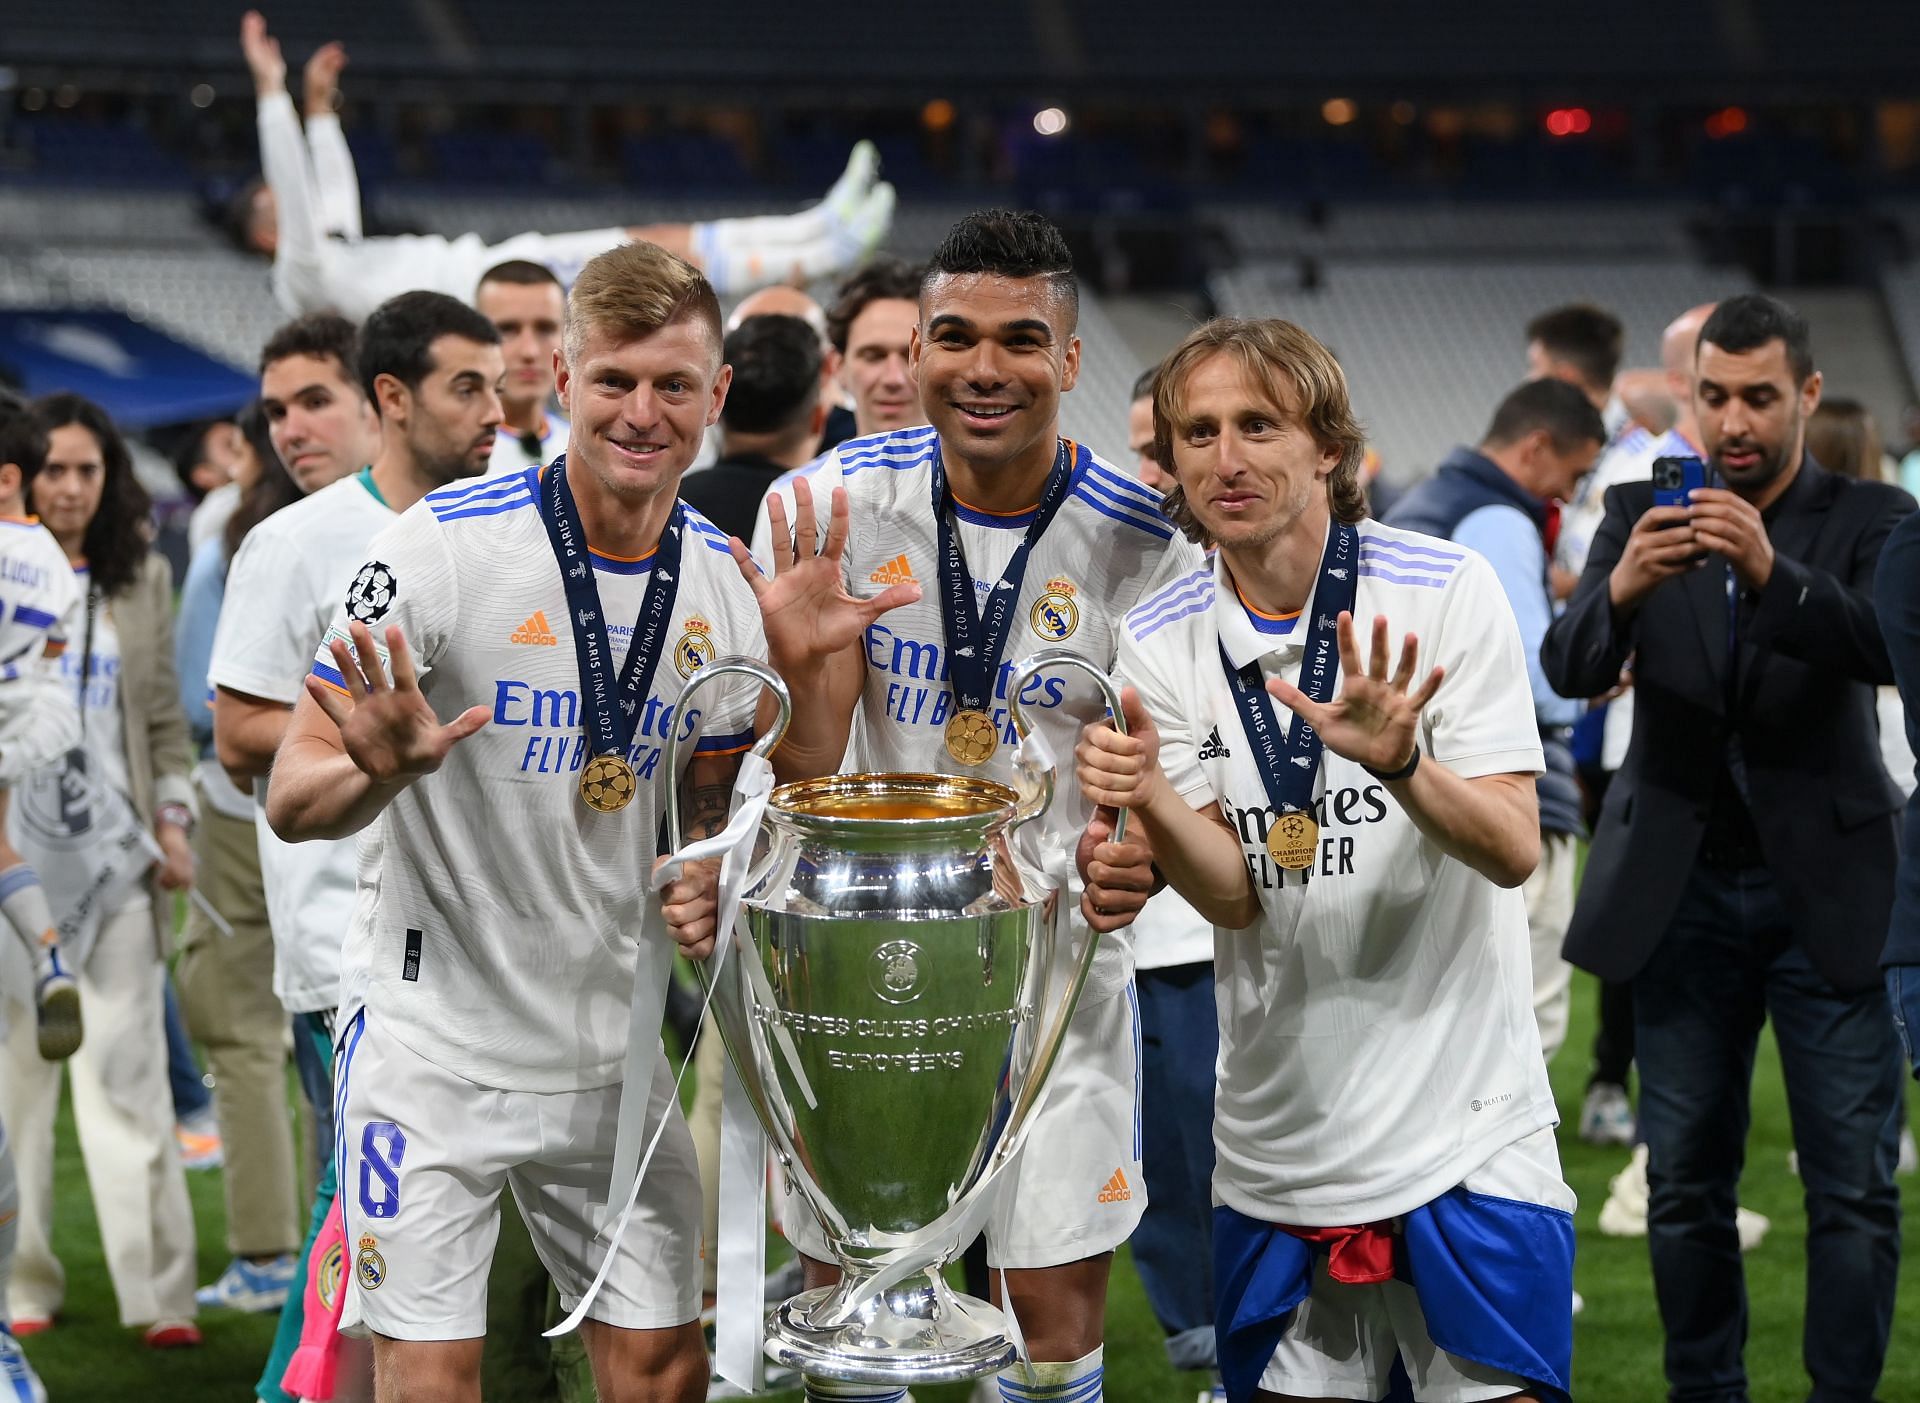 Real Madrid are European champions for the 14th team.